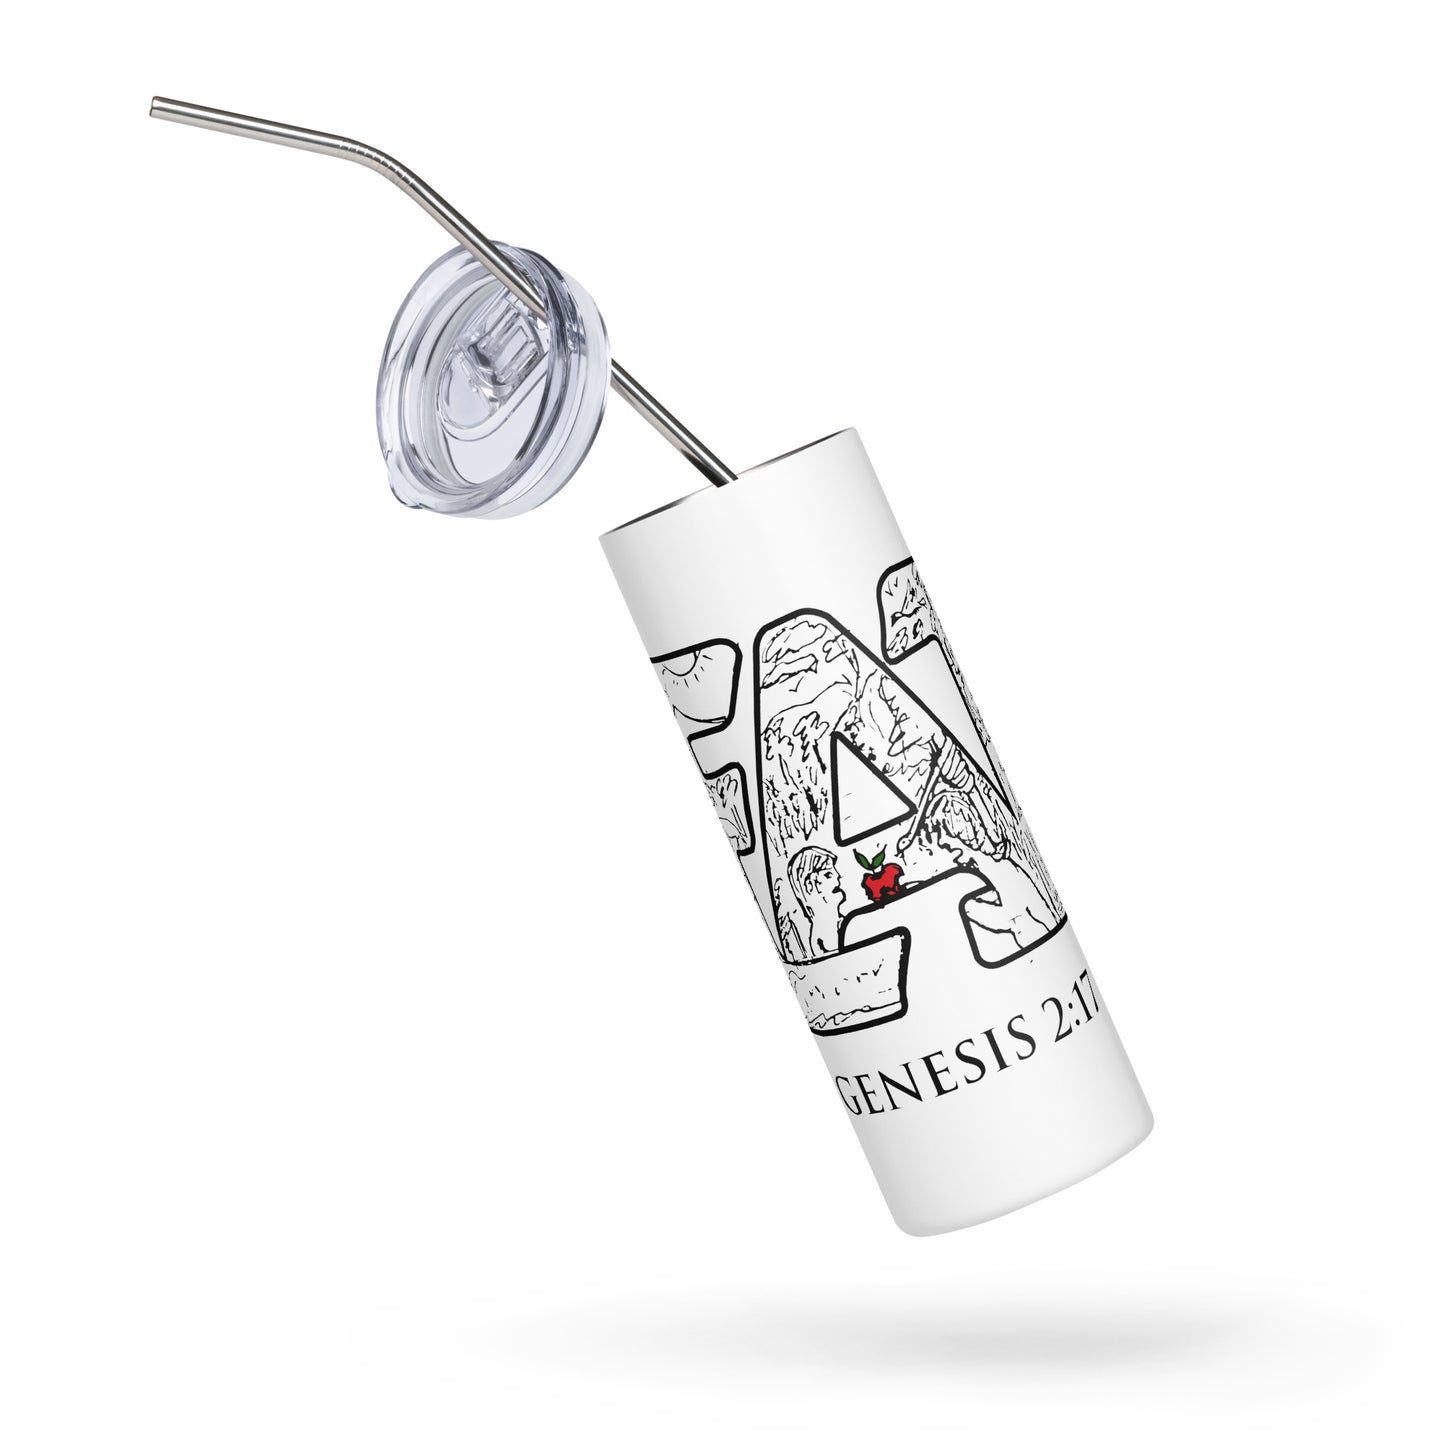 Death Stainless Steel Tumbler